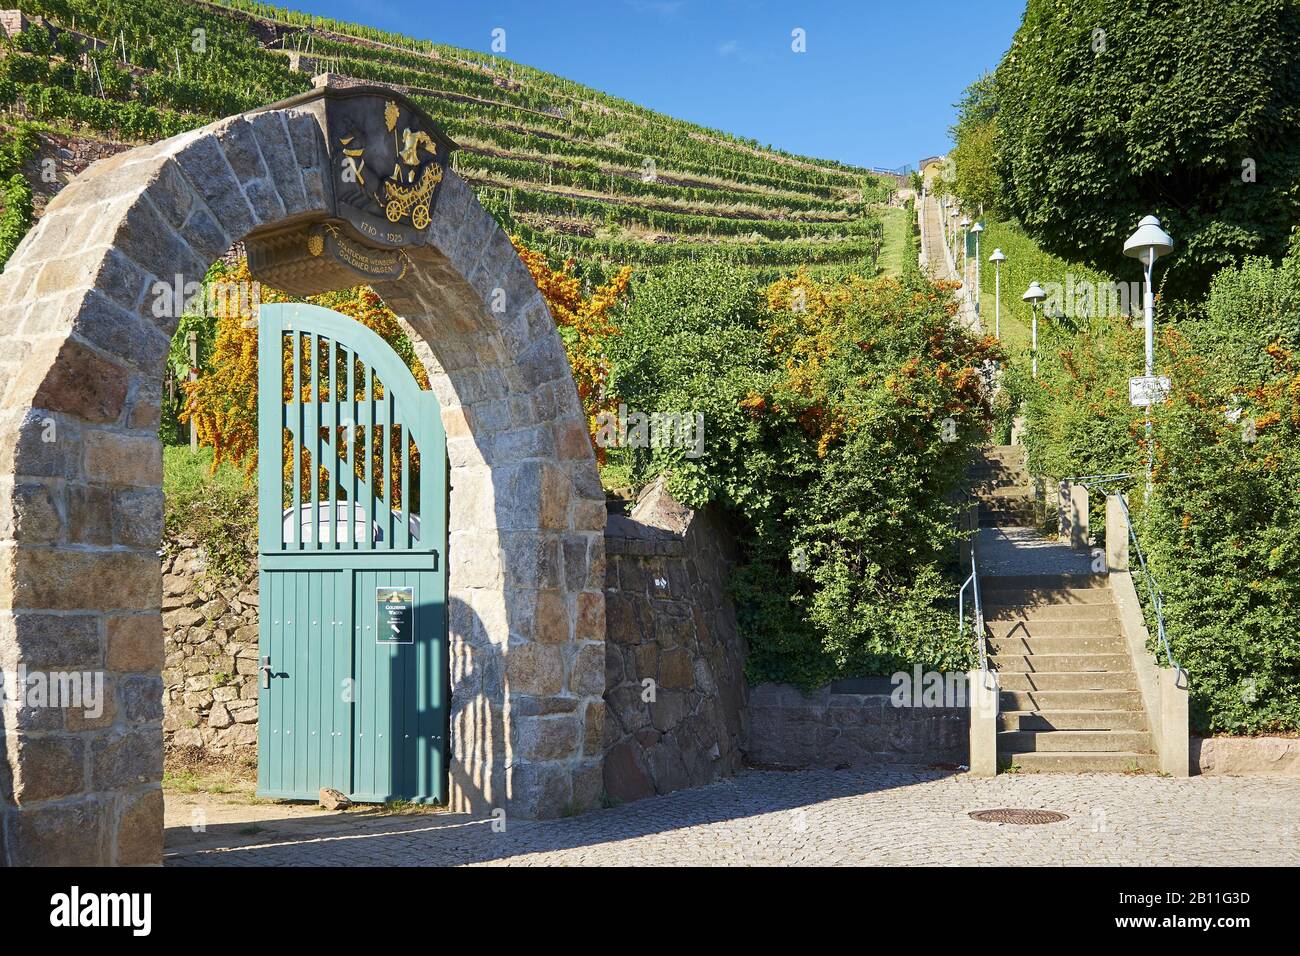 Spitzshausreppe with gate to the Goldener Wagen winery, Radebeul, Saxony, Germany Stock Photo